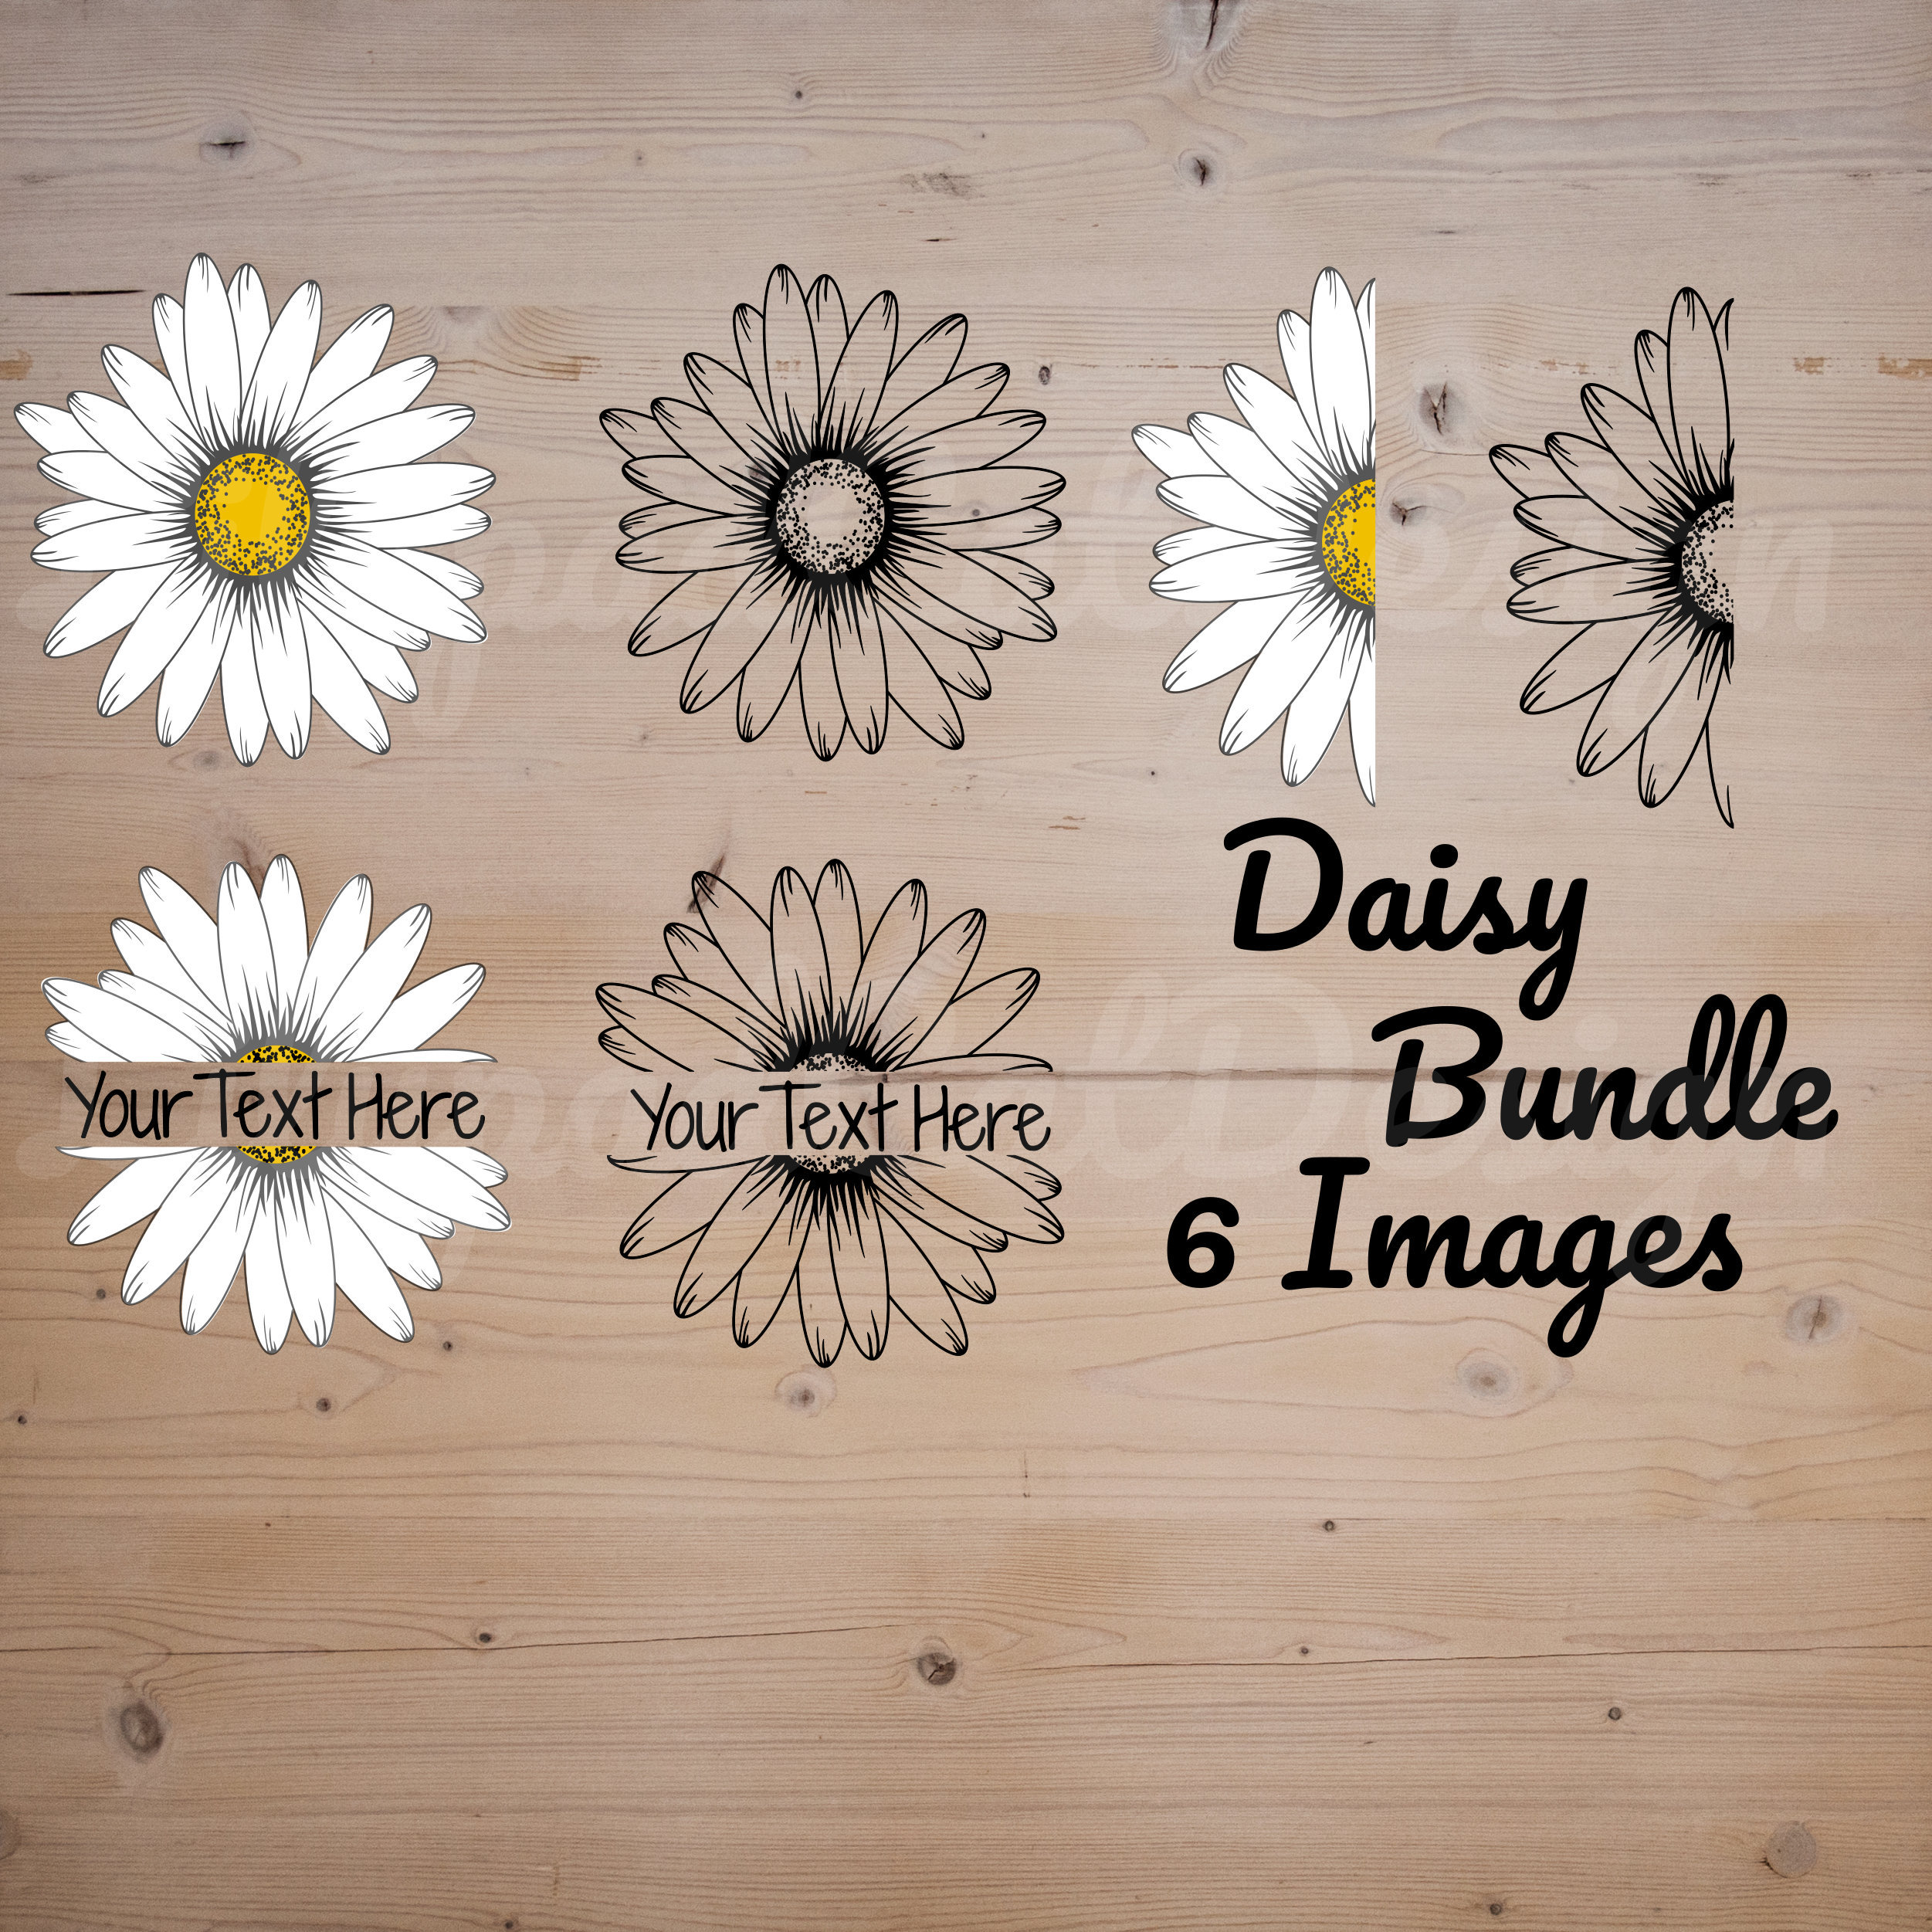 Download Daisy Bundle Svg Daisy Svg 6 Images Included Half Daisy Etsy